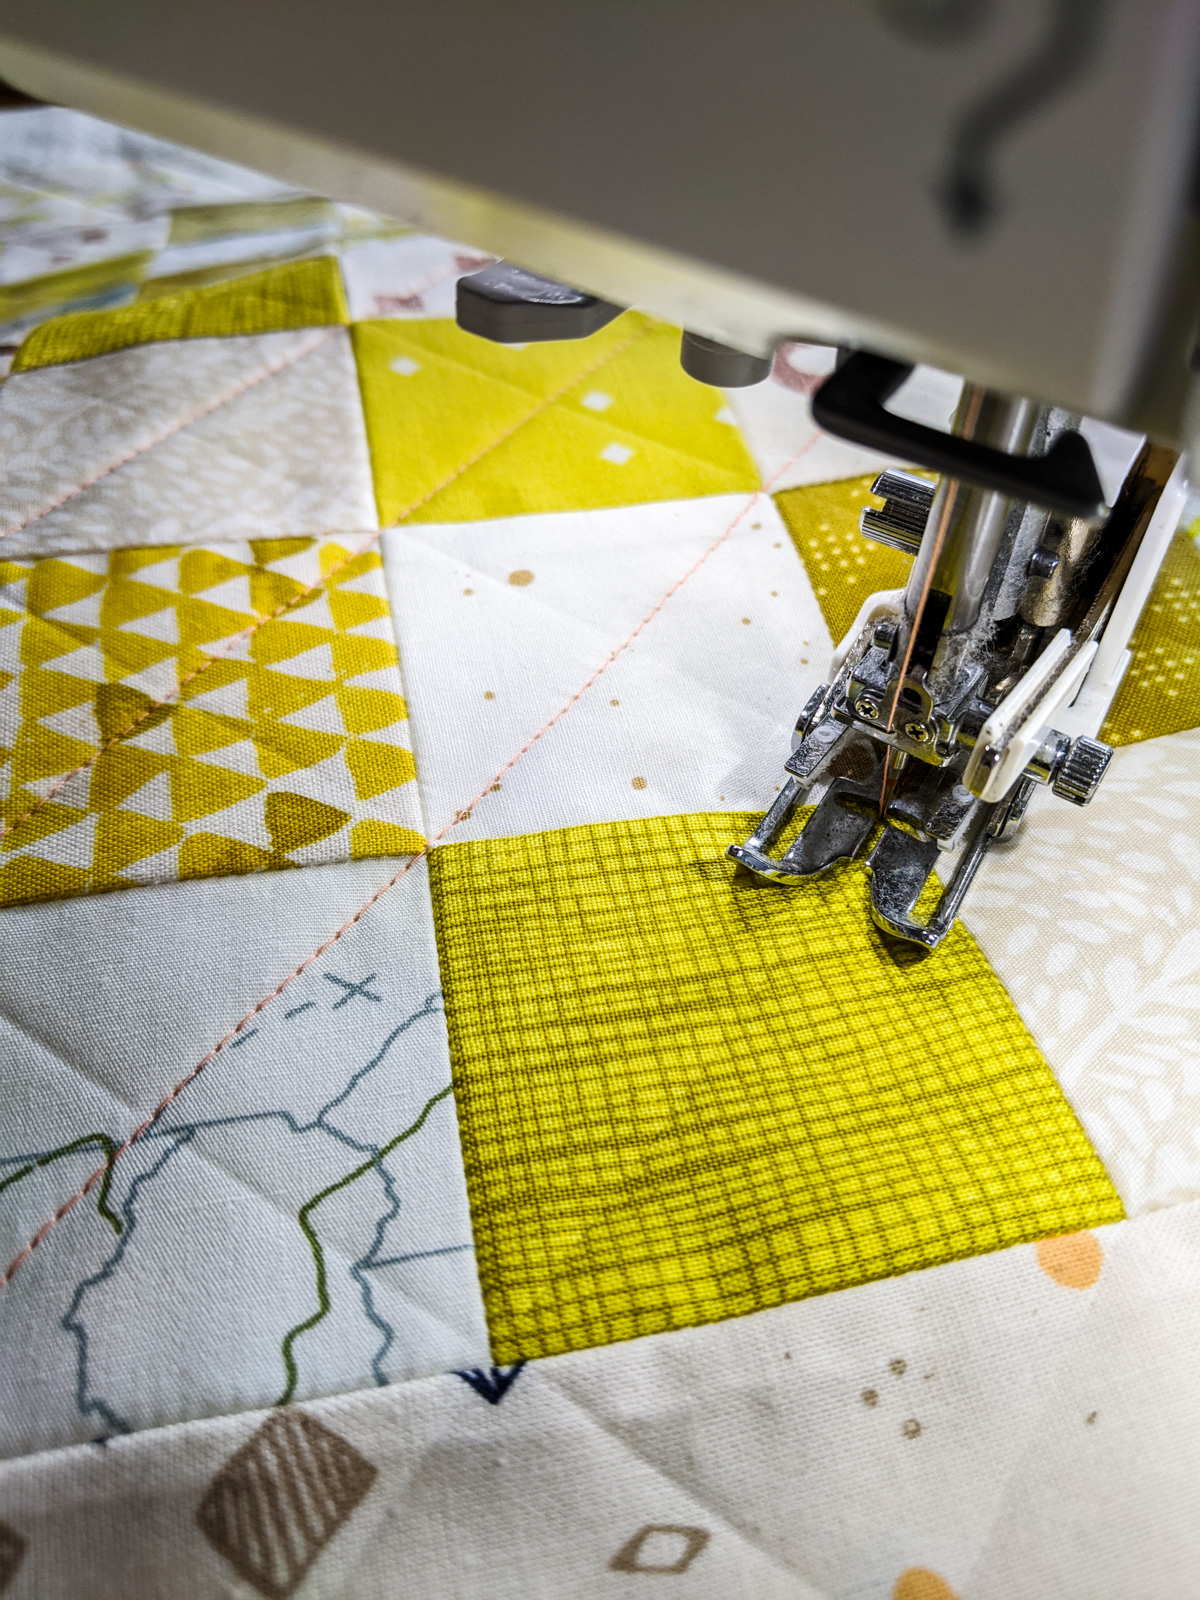 Learn all of the skills needed to make a quilt with this free DIY quilted checkerboard tutorial. A great sewing project for kids! suzyquilts.com #quilting #sewingtutorial